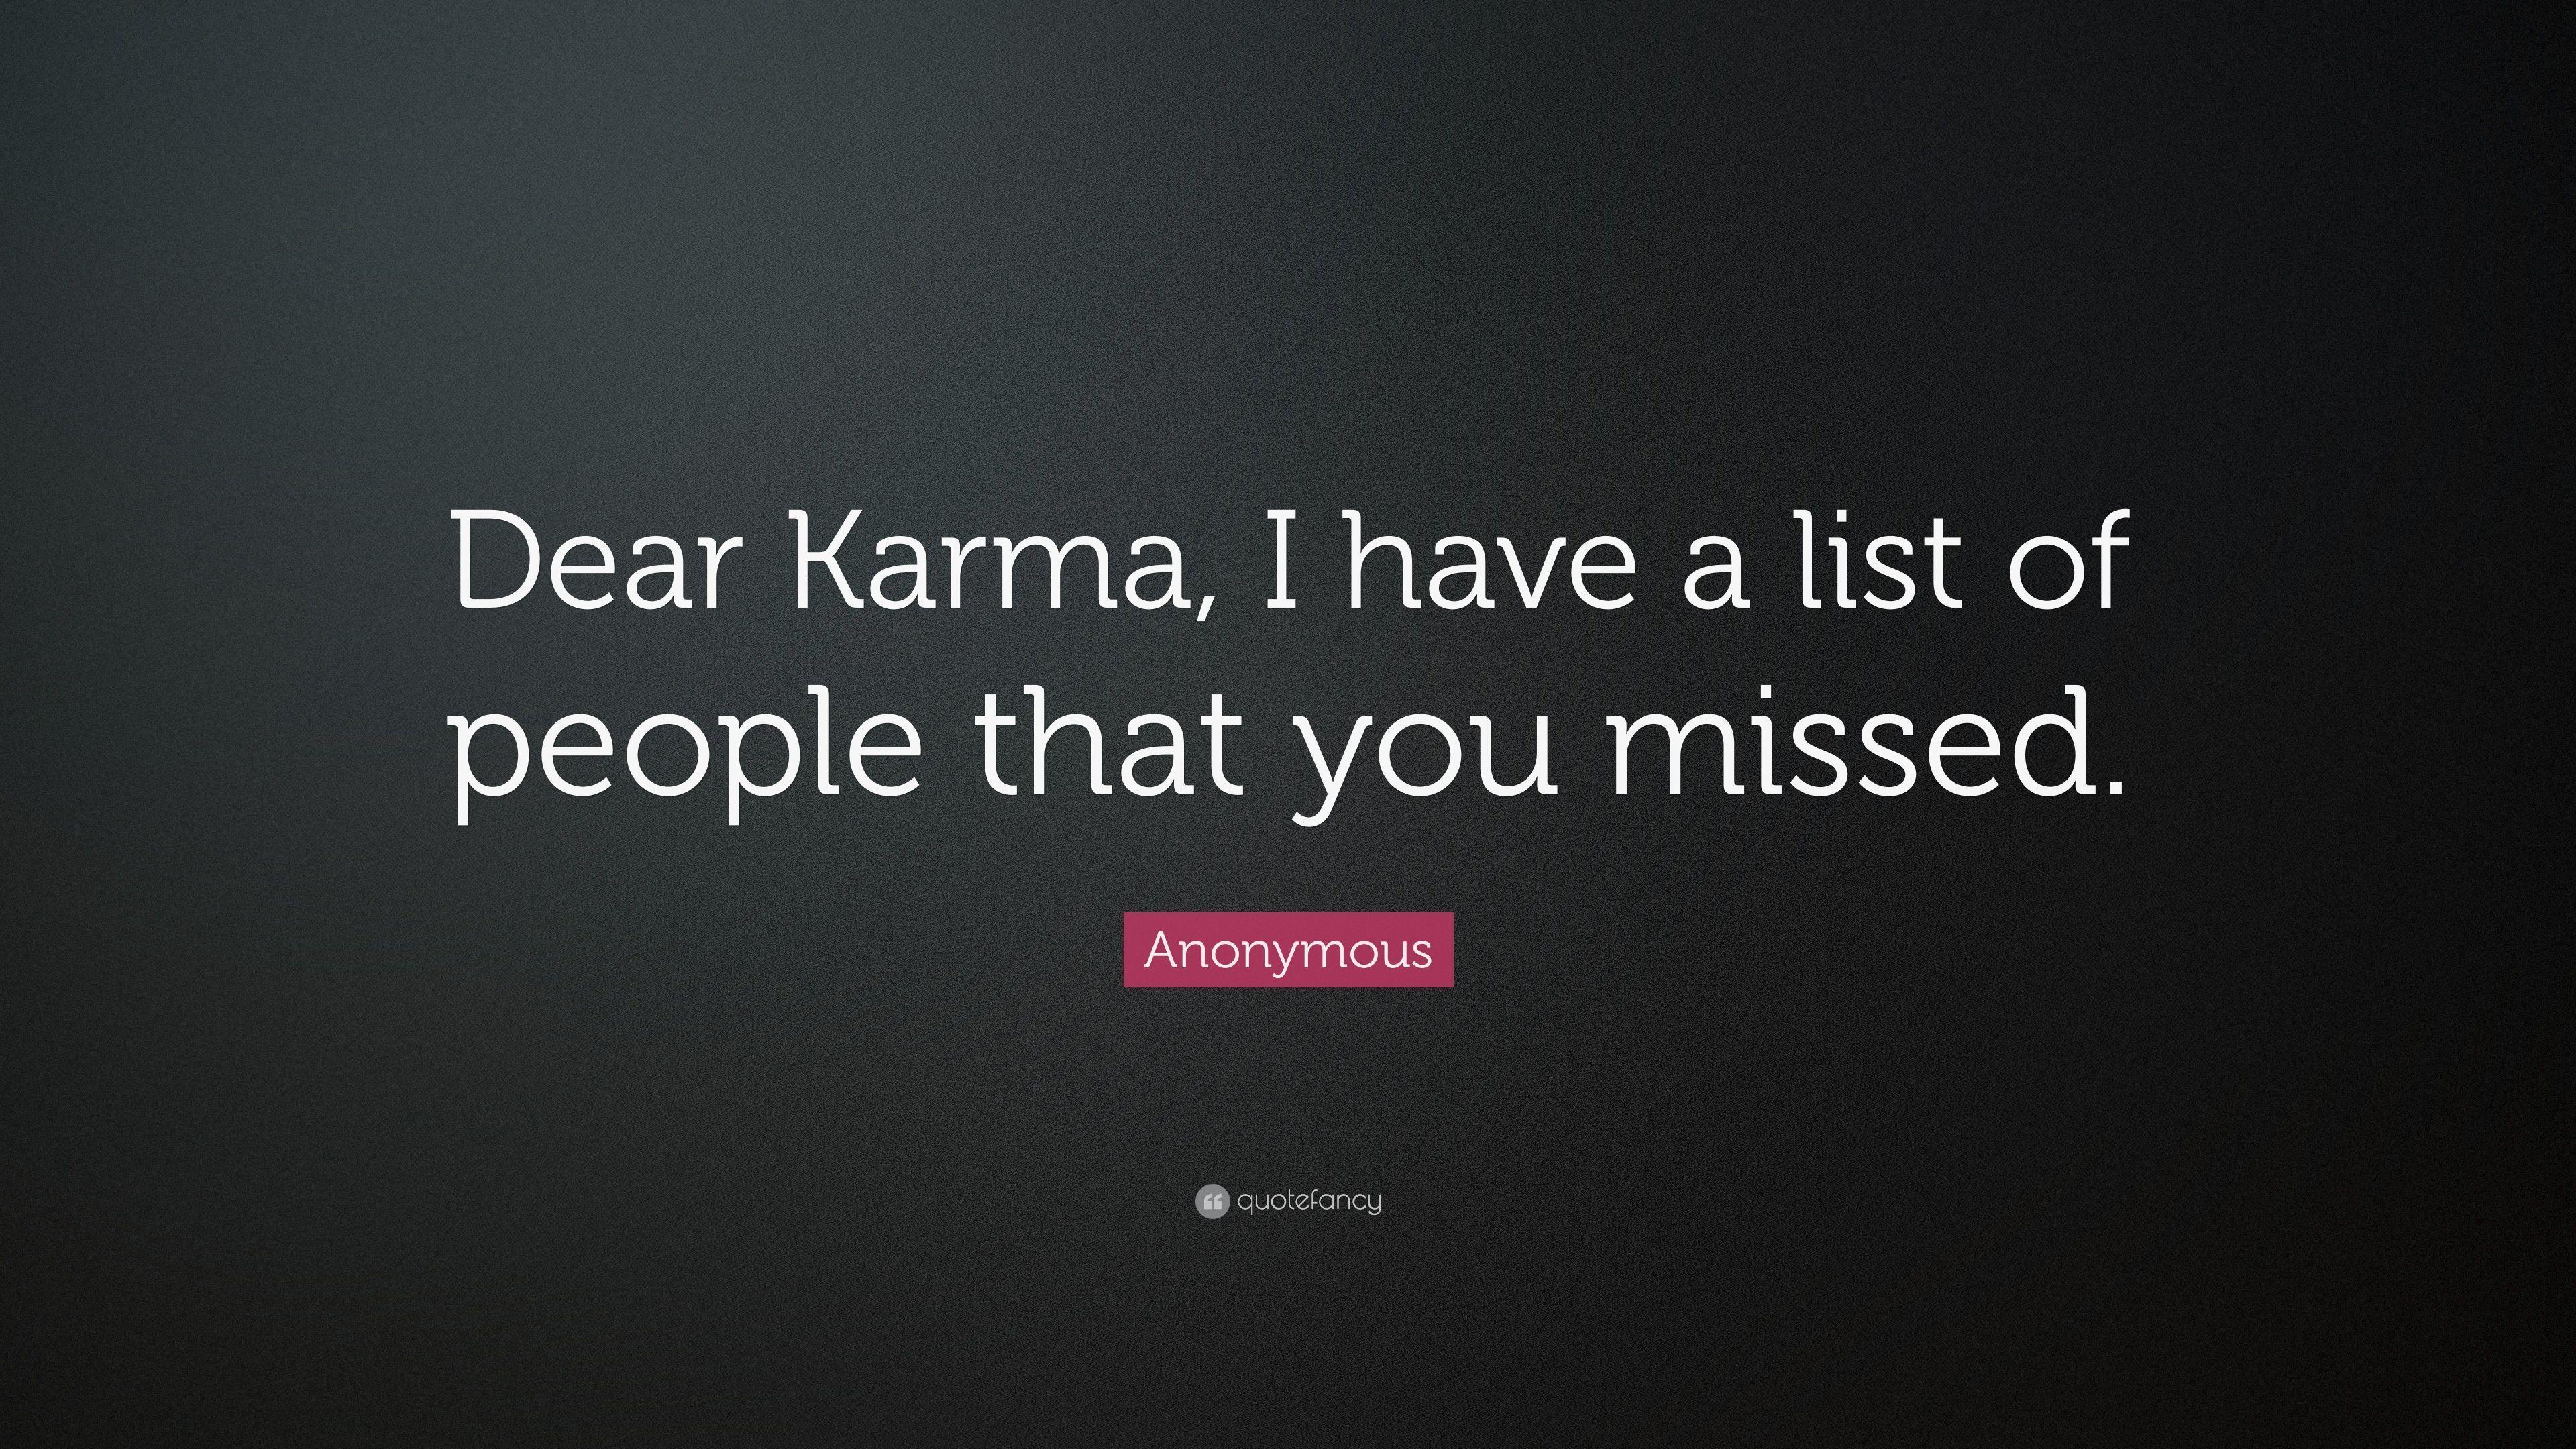 Карма ы. Funny quote Wallpaper. Dear Karma i have a list of people you Missed перевод. Dear Karma i have a list of people you Missed. Funny quotes.